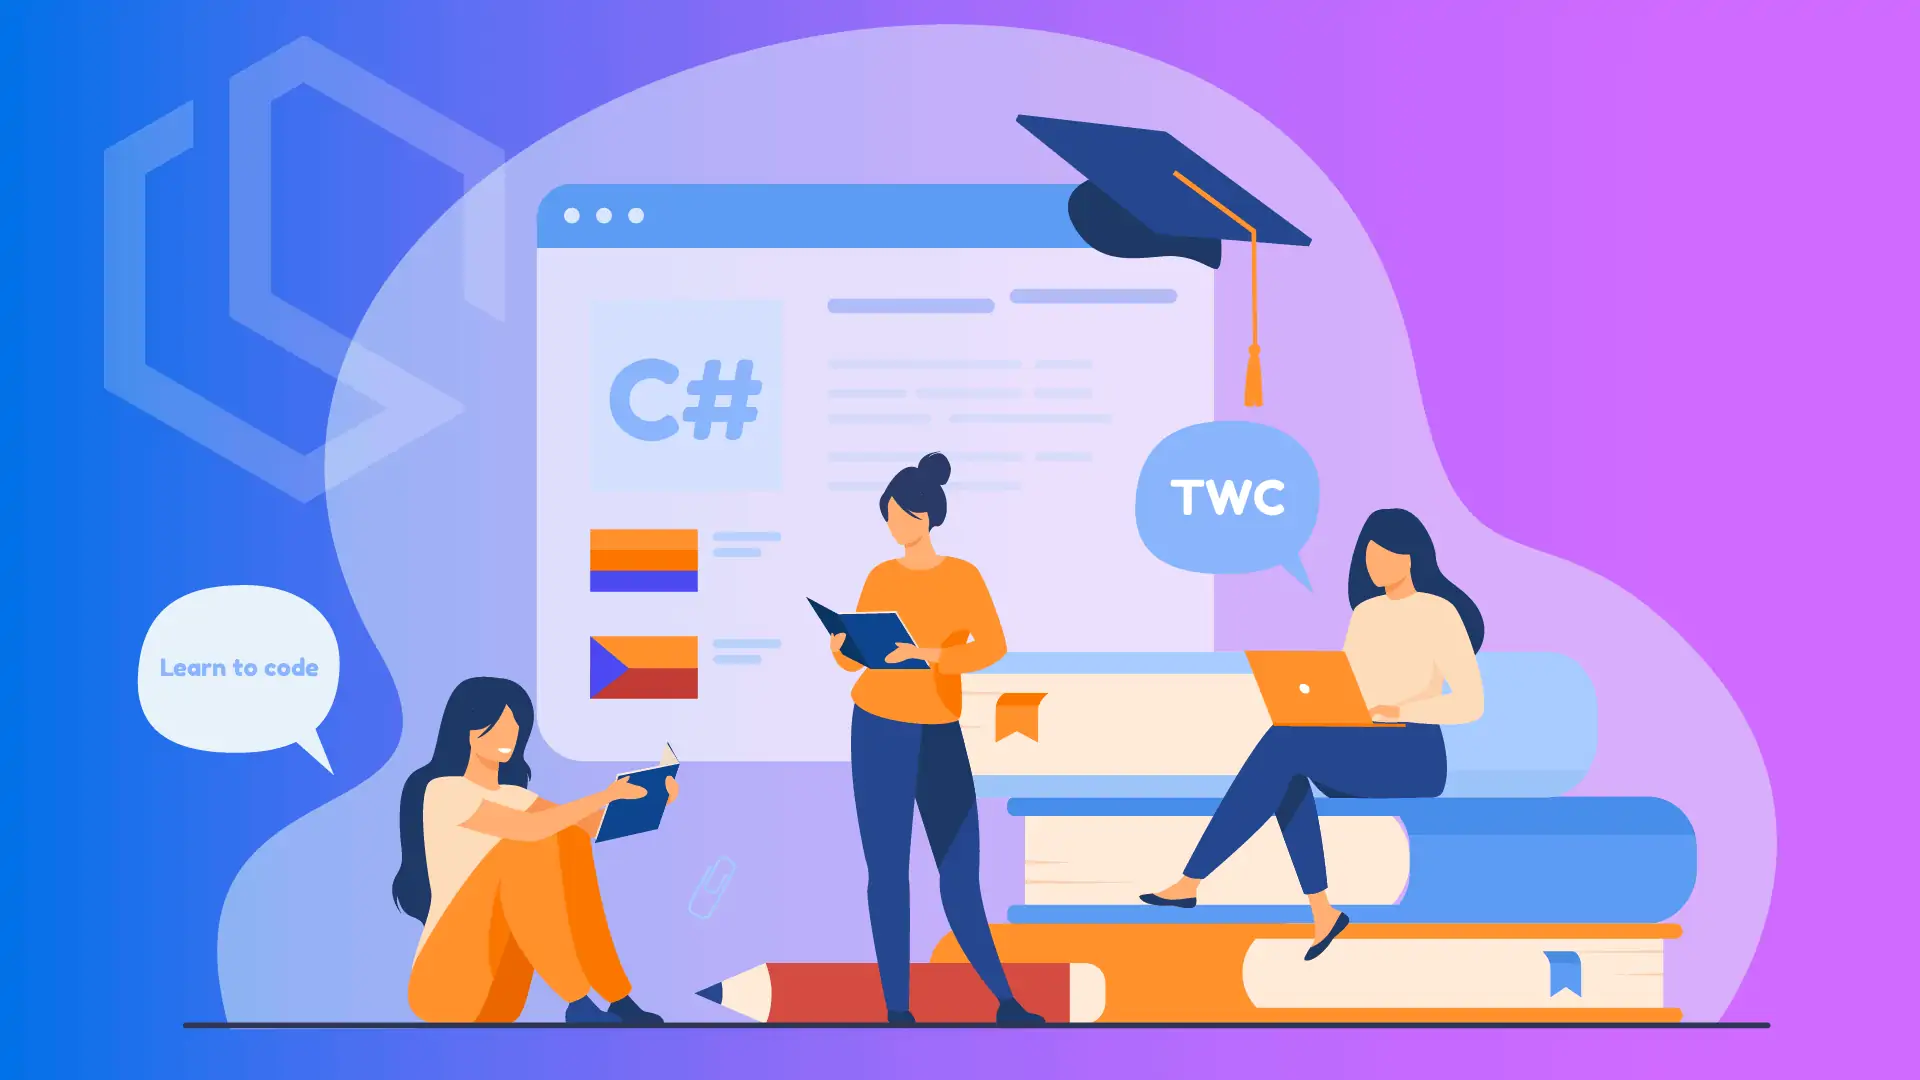 Why You Should Learn To Code In C# 🧑‍💻